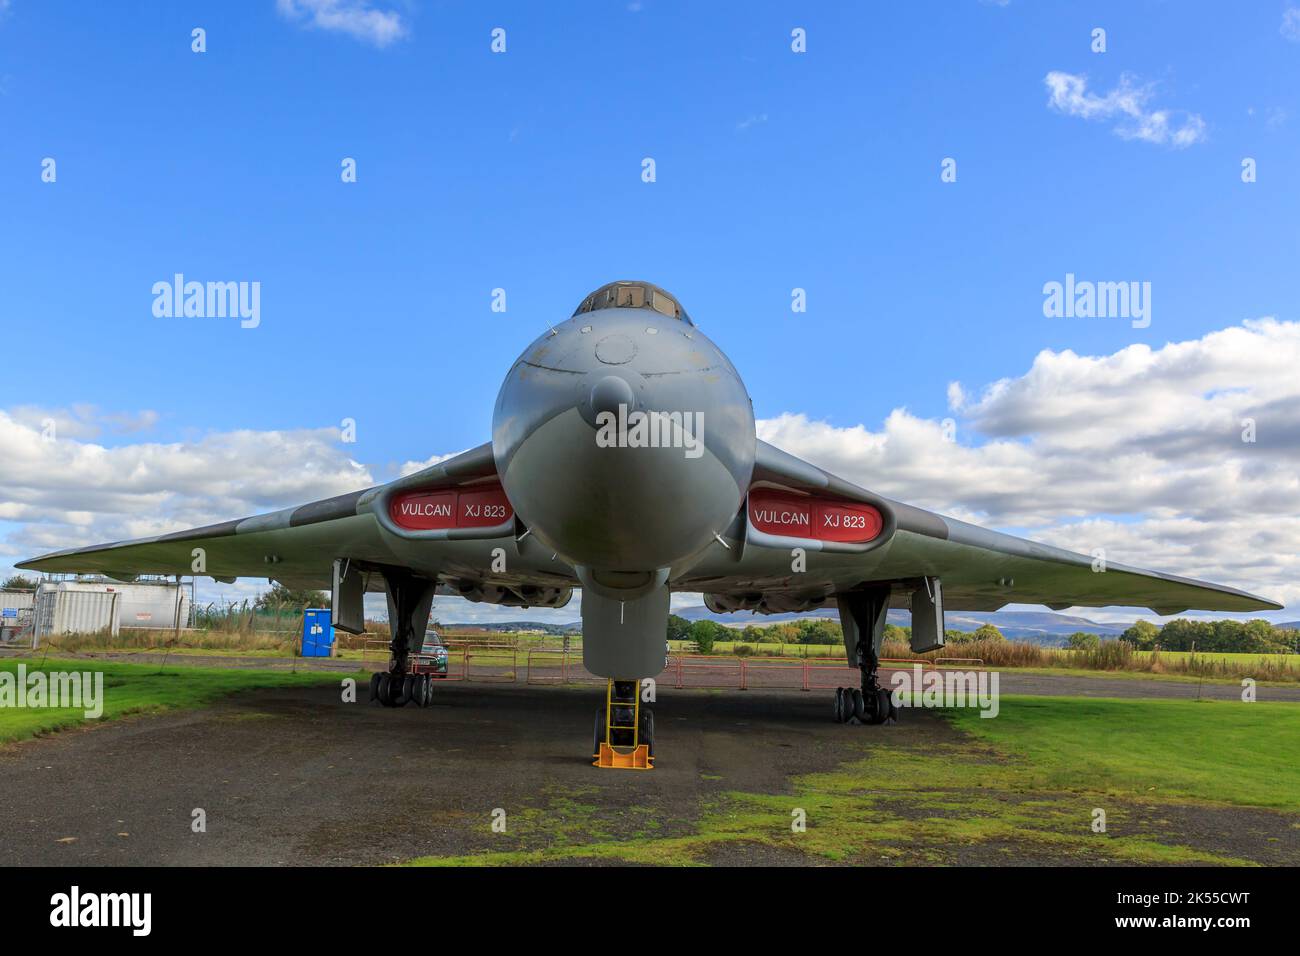 Carlisle, England, September 16, 2022 : Front view of an old Avro Vulcan XJ 823 Bomber on display at the Solway aviation museum at Carlisle airport  U Stock Photo